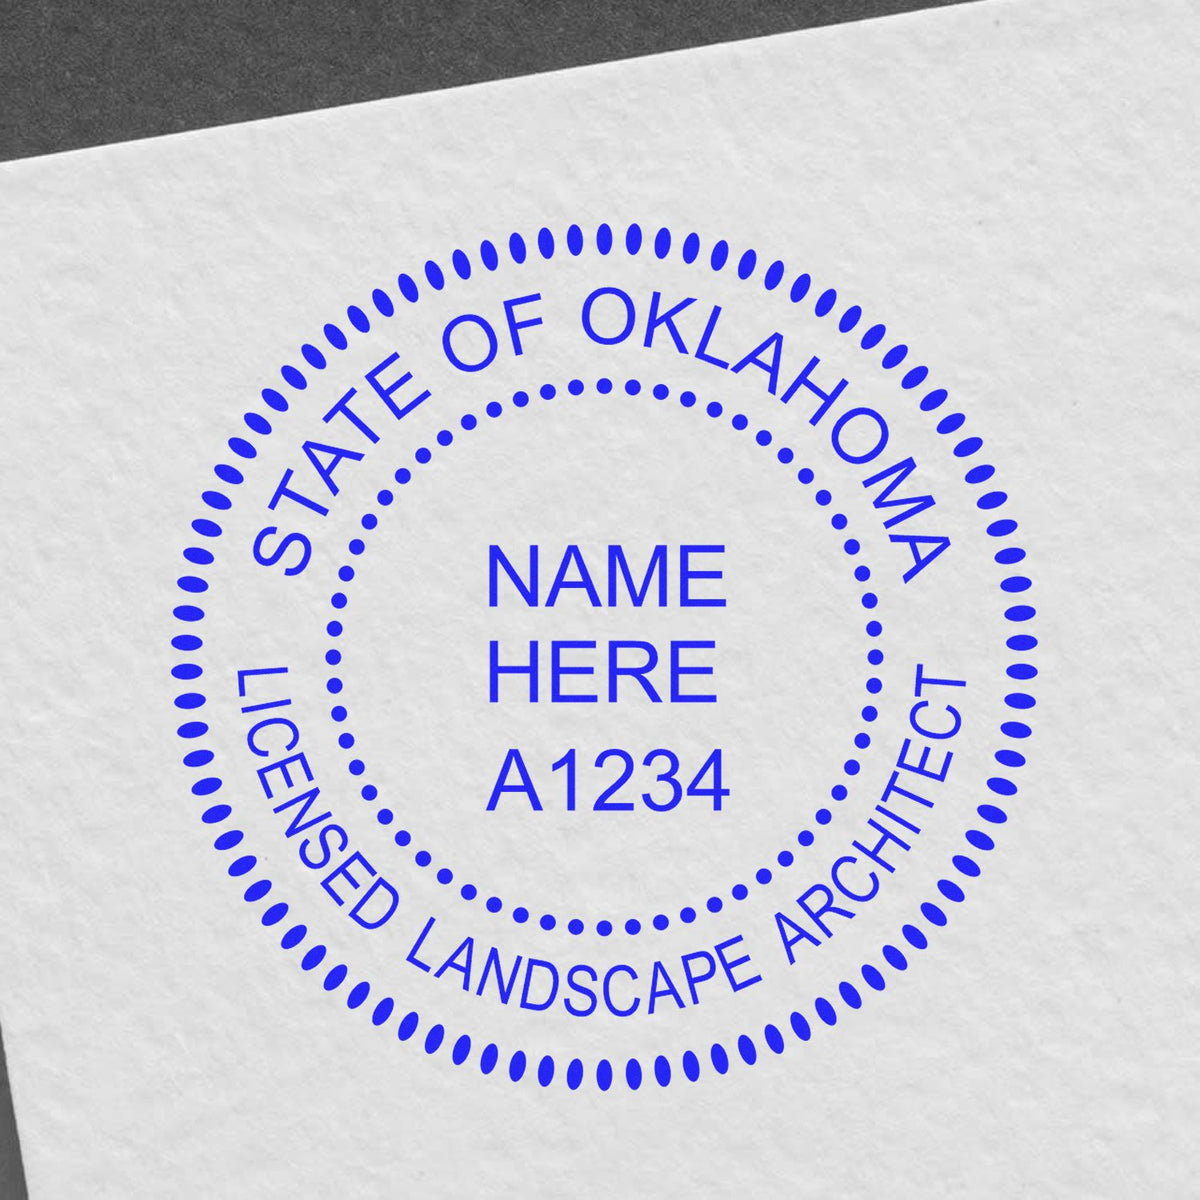 The Slim Pre-Inked Oklahoma Landscape Architect Seal Stamp stamp impression comes to life with a crisp, detailed photo on paper - showcasing true professional quality.